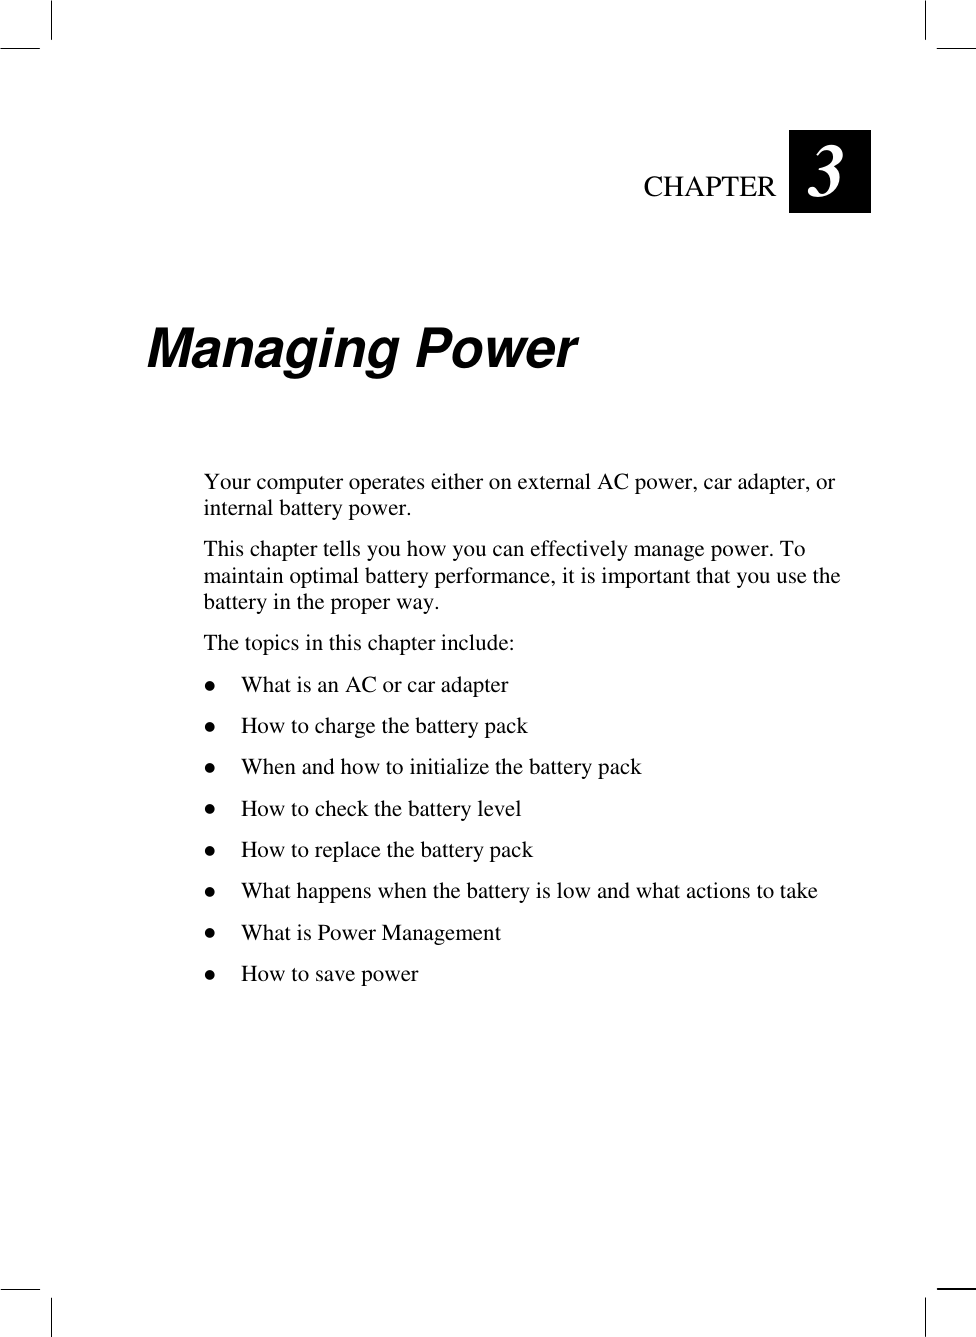   CHAPTER  3 Managing Power Your computer operates either on external AC power, car adapter, or internal battery power. This chapter tells you how you can effectively manage power. To maintain optimal battery performance, it is important that you use the battery in the proper way. The topics in this chapter include: !  What is an AC or car adapter !  How to charge the battery pack !  When and how to initialize the battery pack !  How to check the battery level !  How to replace the battery pack !  What happens when the battery is low and what actions to take !  What is Power Management !  How to save power 